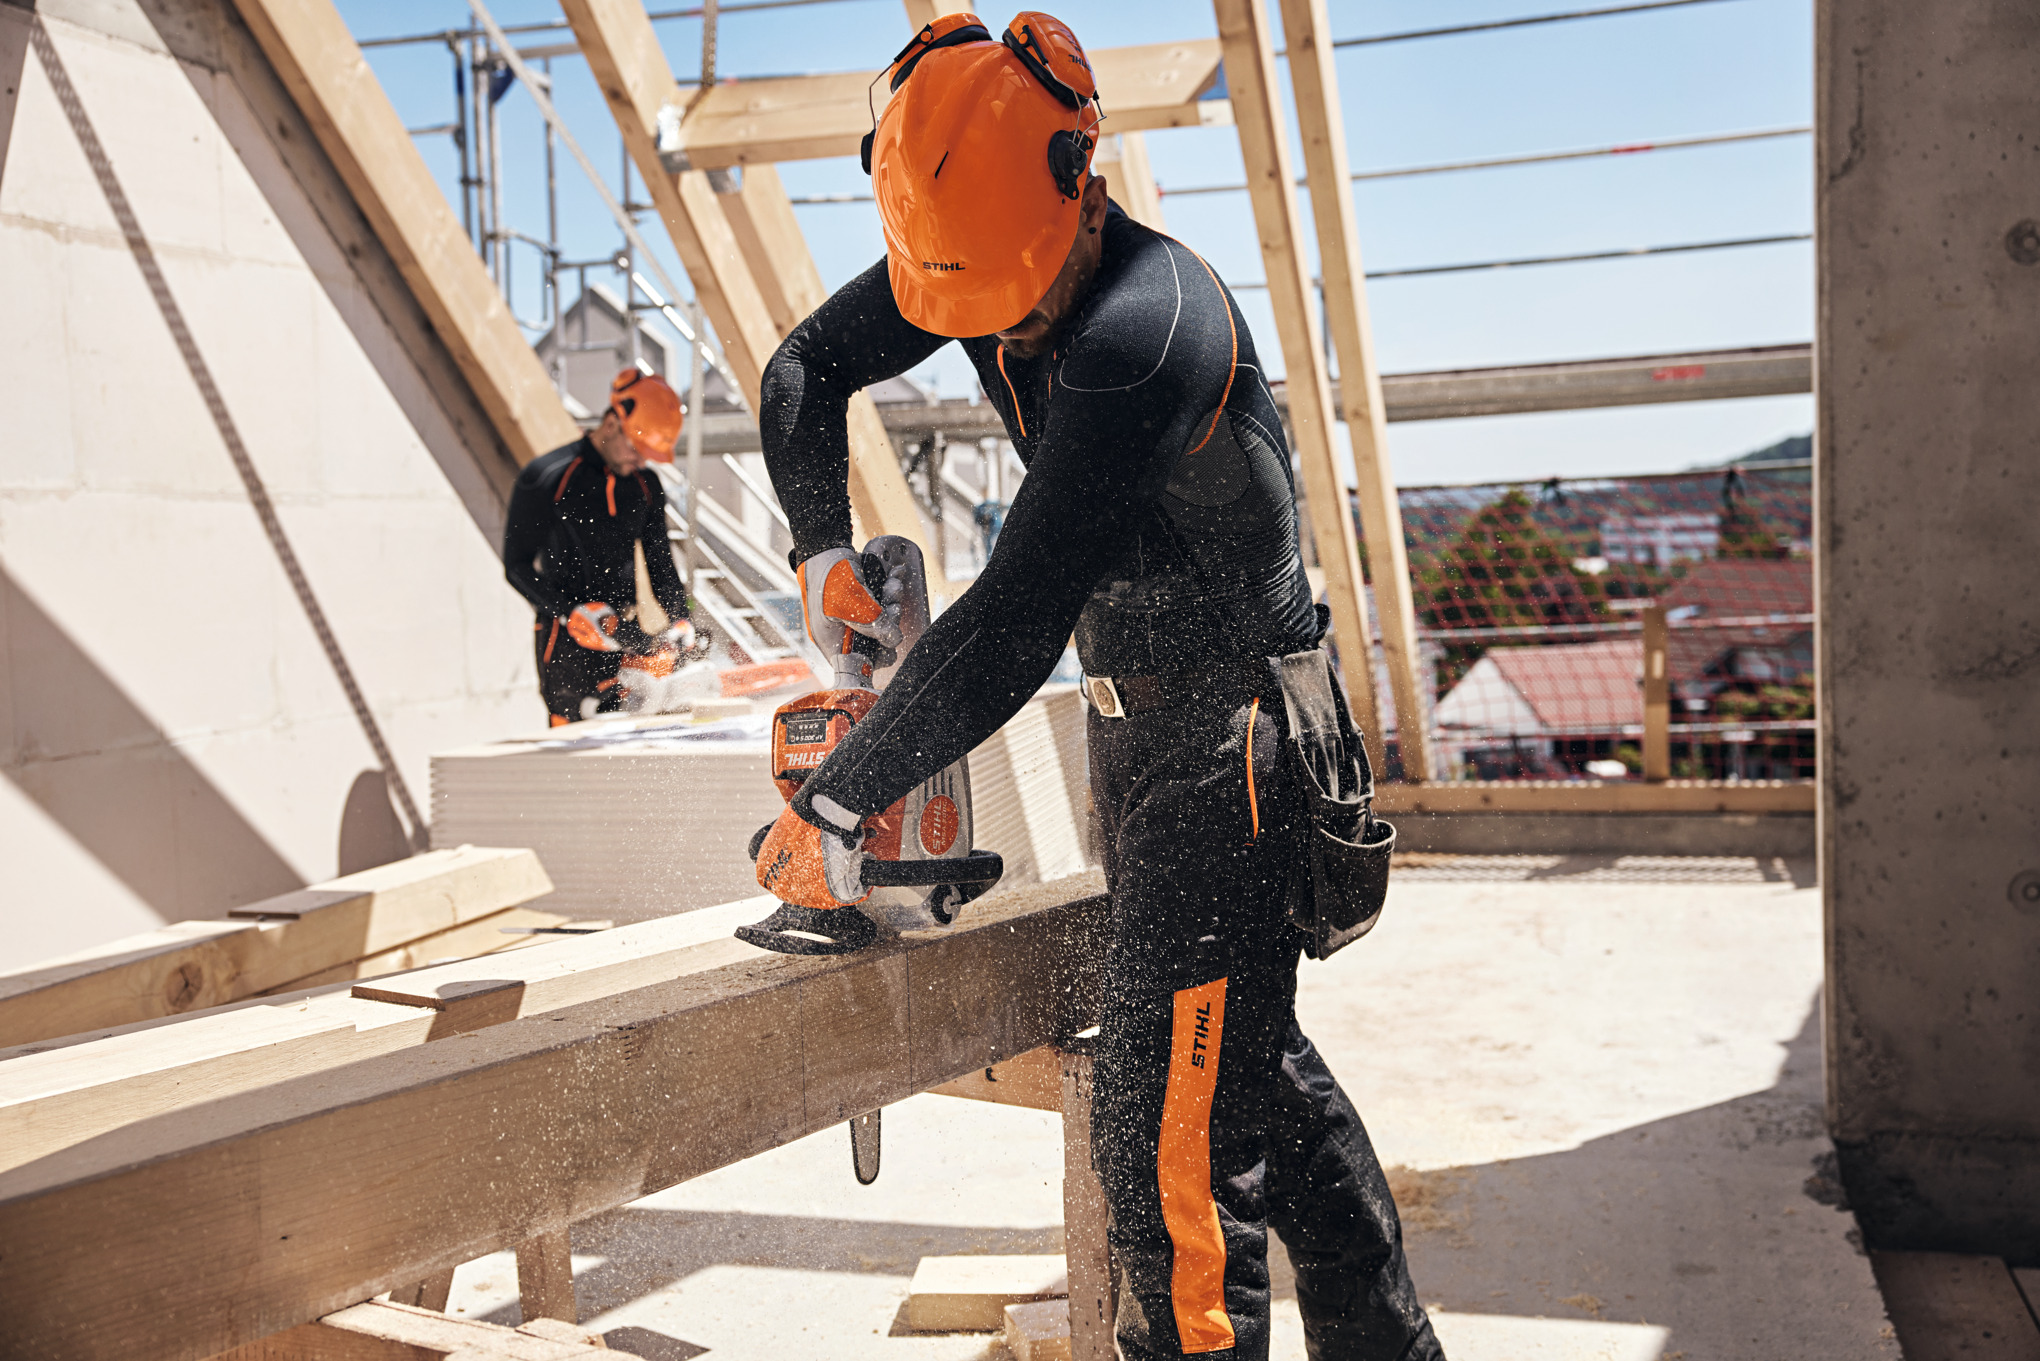 A STIHL professional in a loft saws a wooden beam with a cordless chainsaw, while another worker uses a cordless chainsaw in the background